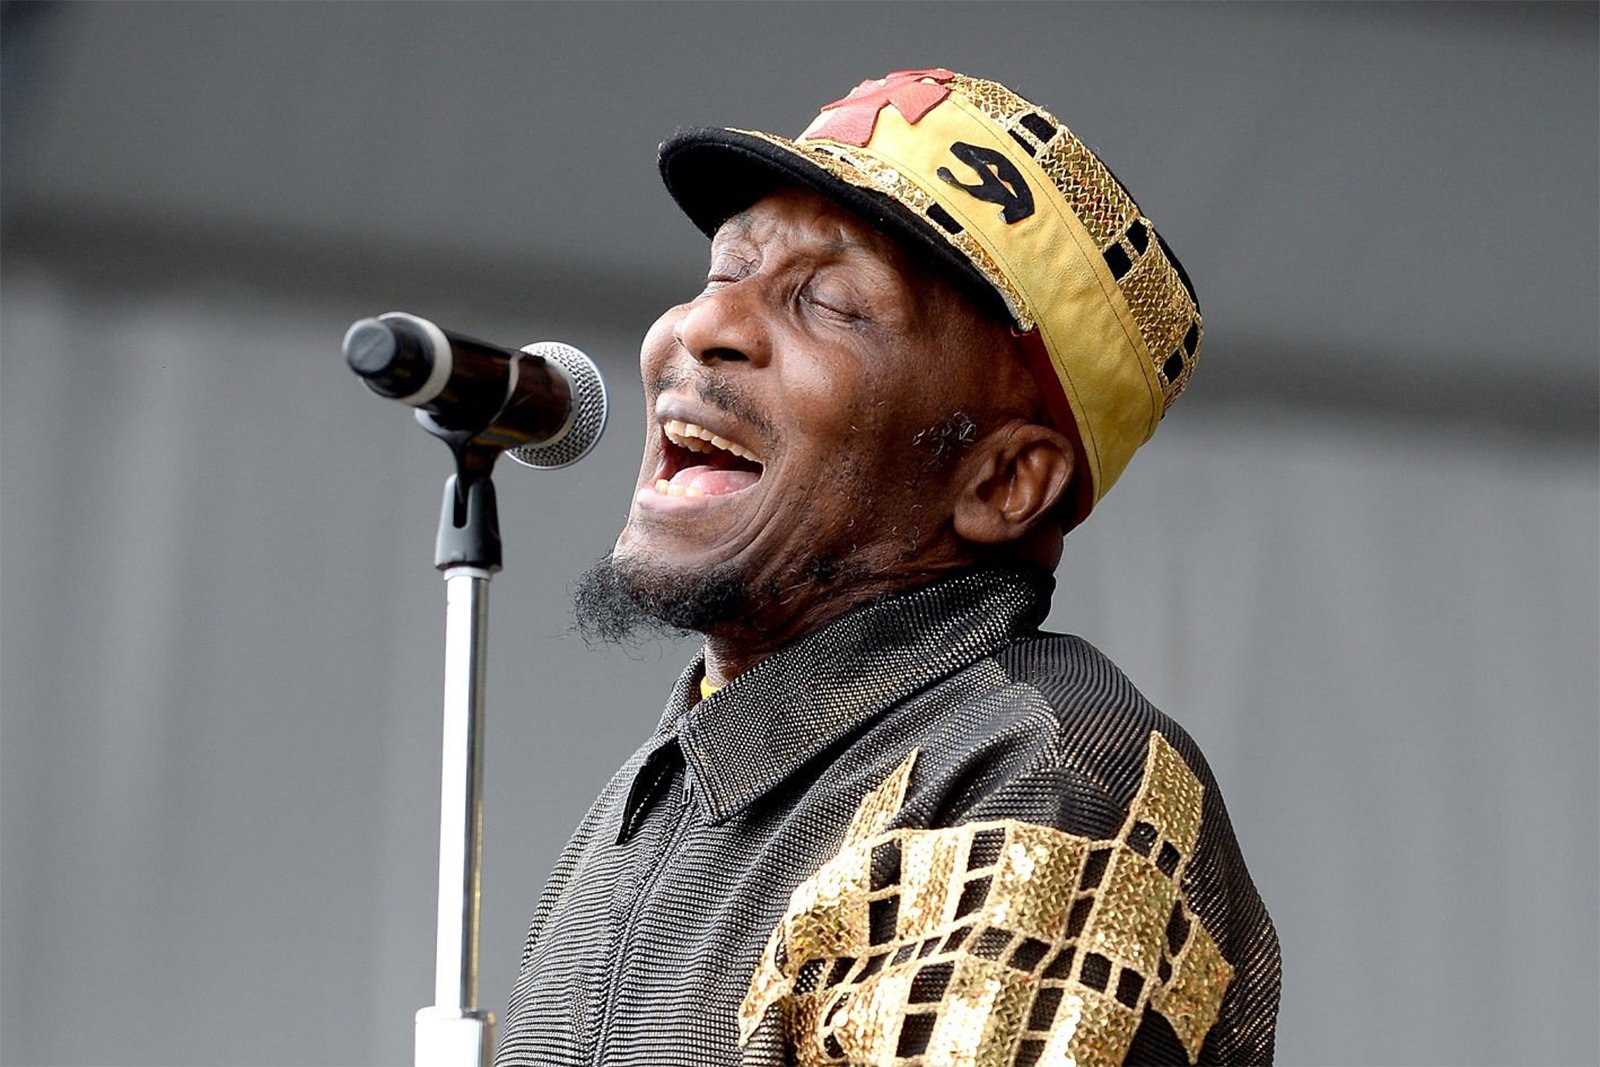 jimmy cliff on tour